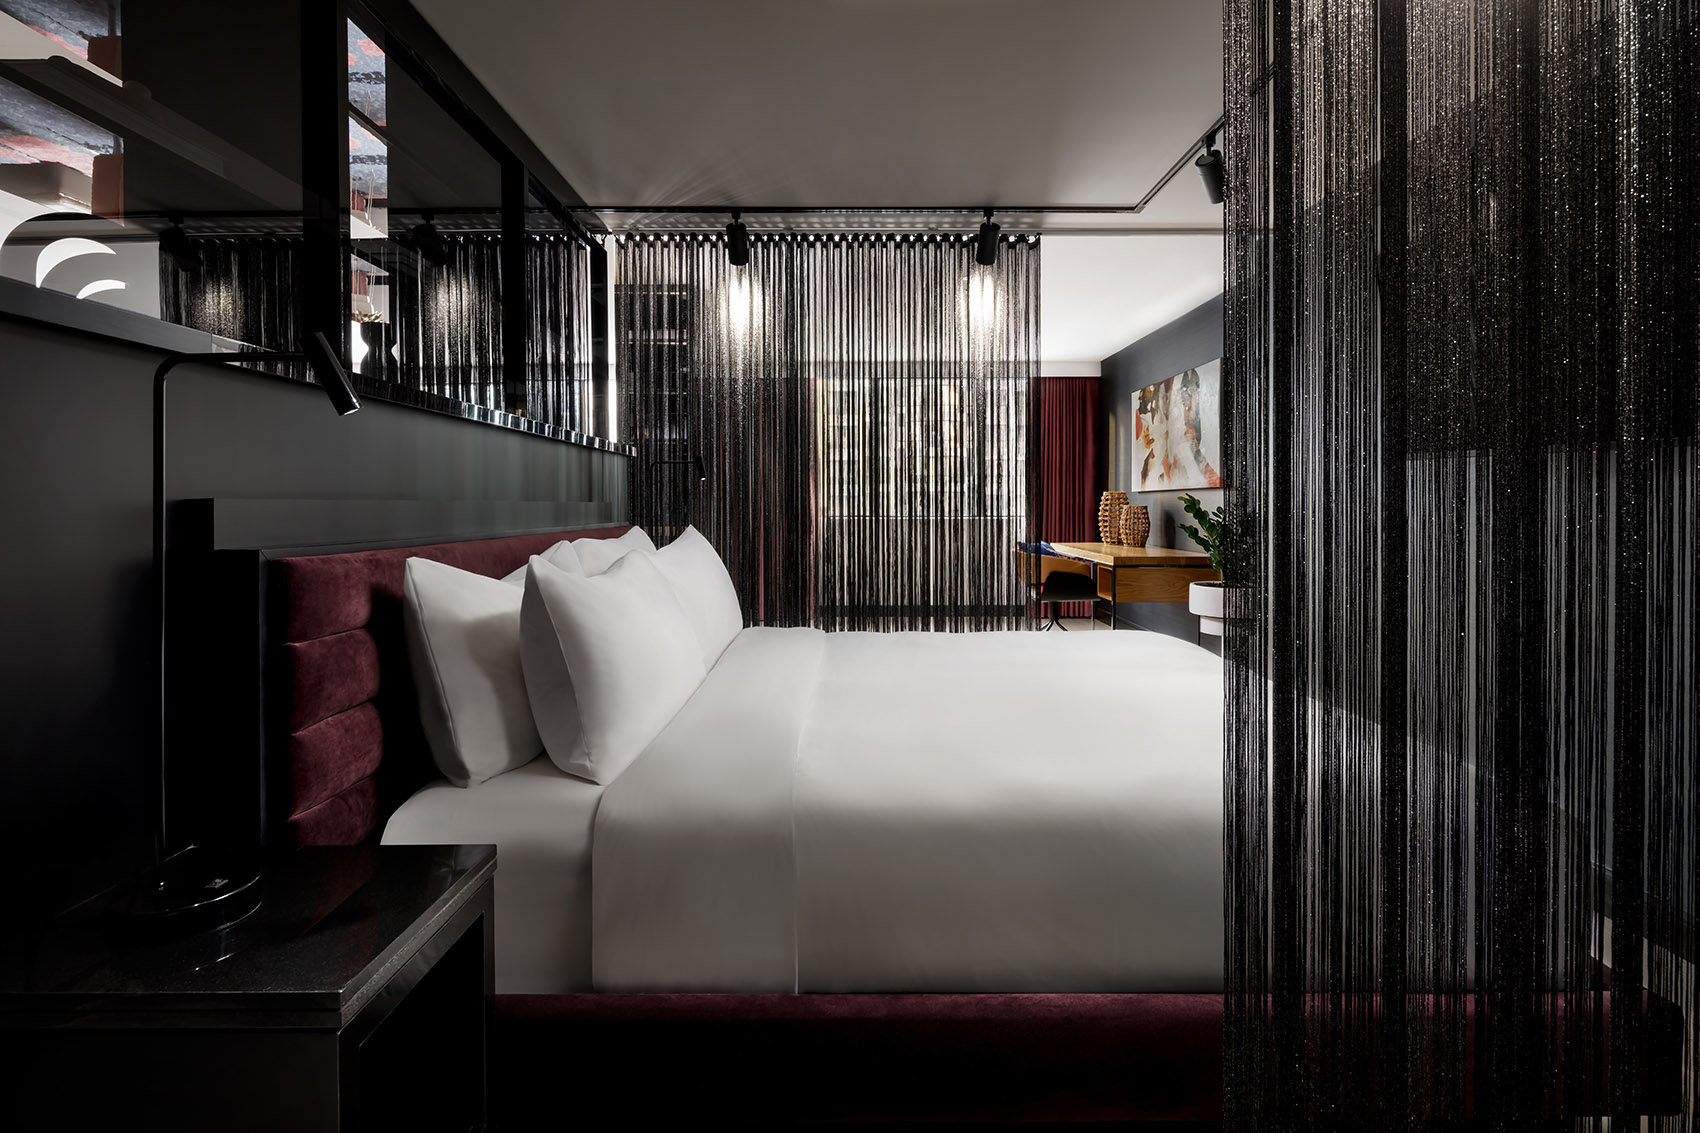 003 W Hotel Toronto By Sid Lee Architecture 